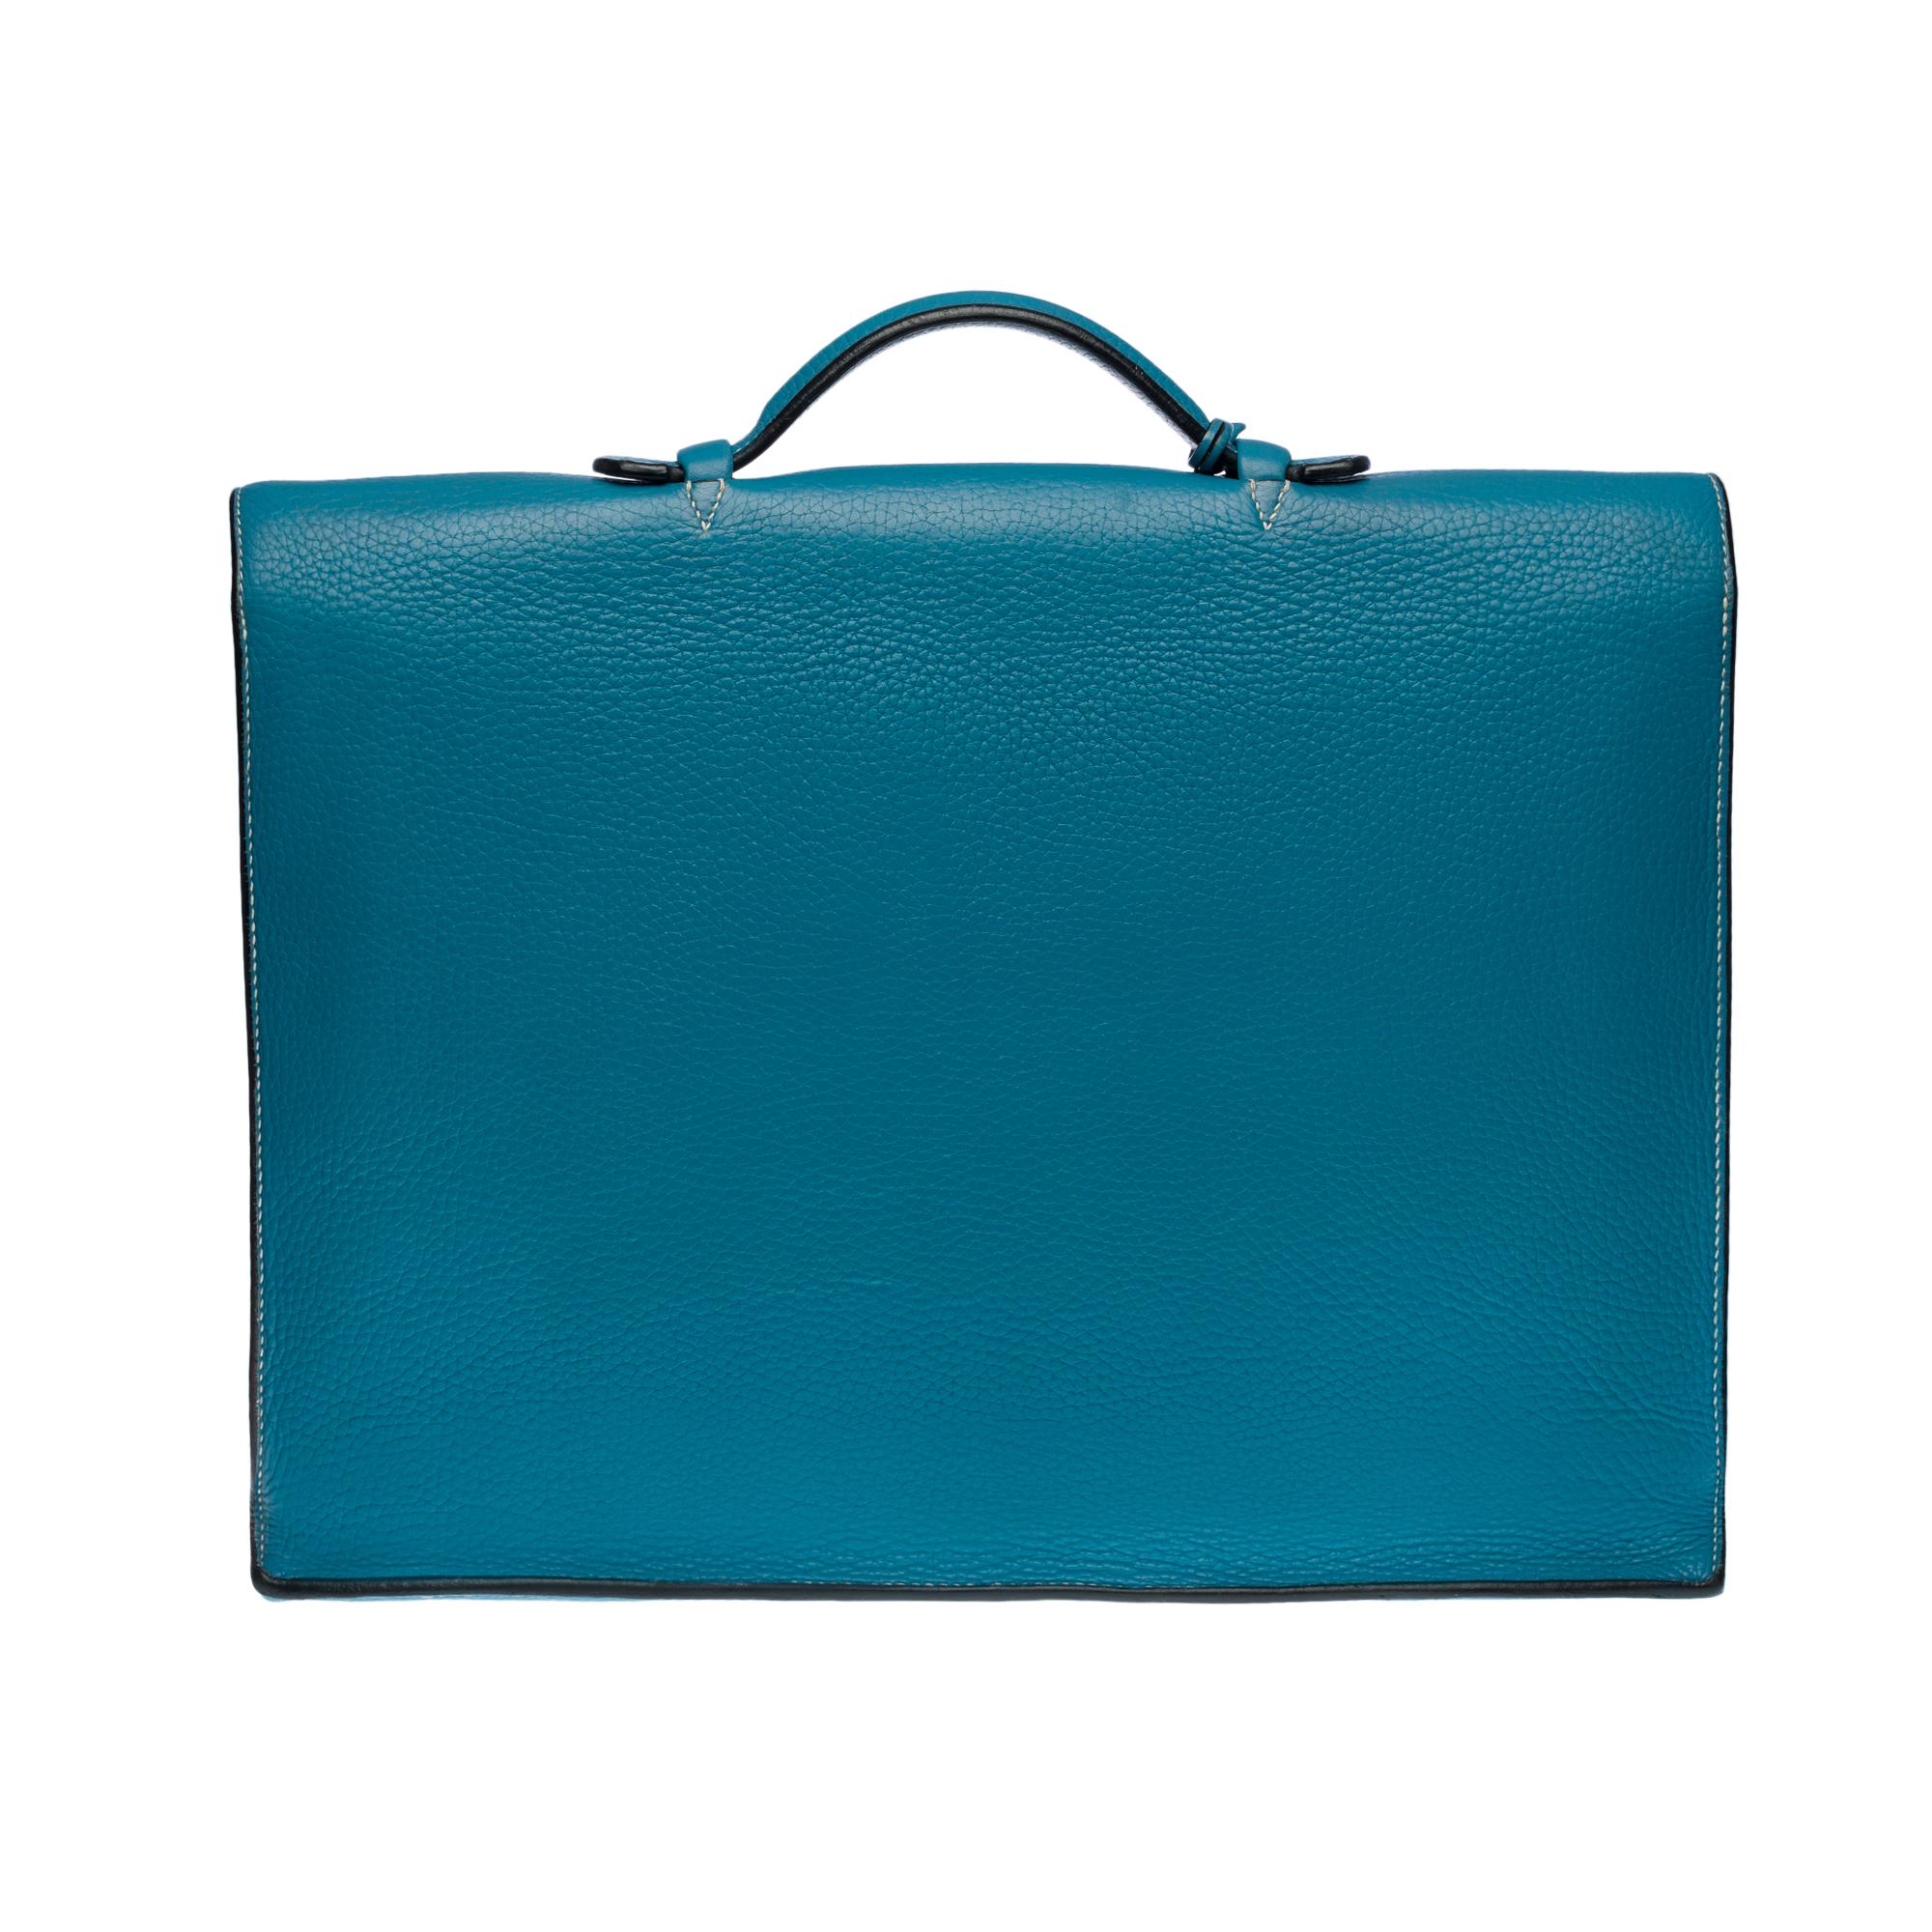 Splendid and very chic Hermès Briefcase bag in Togo blue jeans leather with white stitching, palladium silver metal hardware, simple blue leather handle allowing a hand-carried

Folding latch closure on flap
Leather/blue suede inner lining, 2